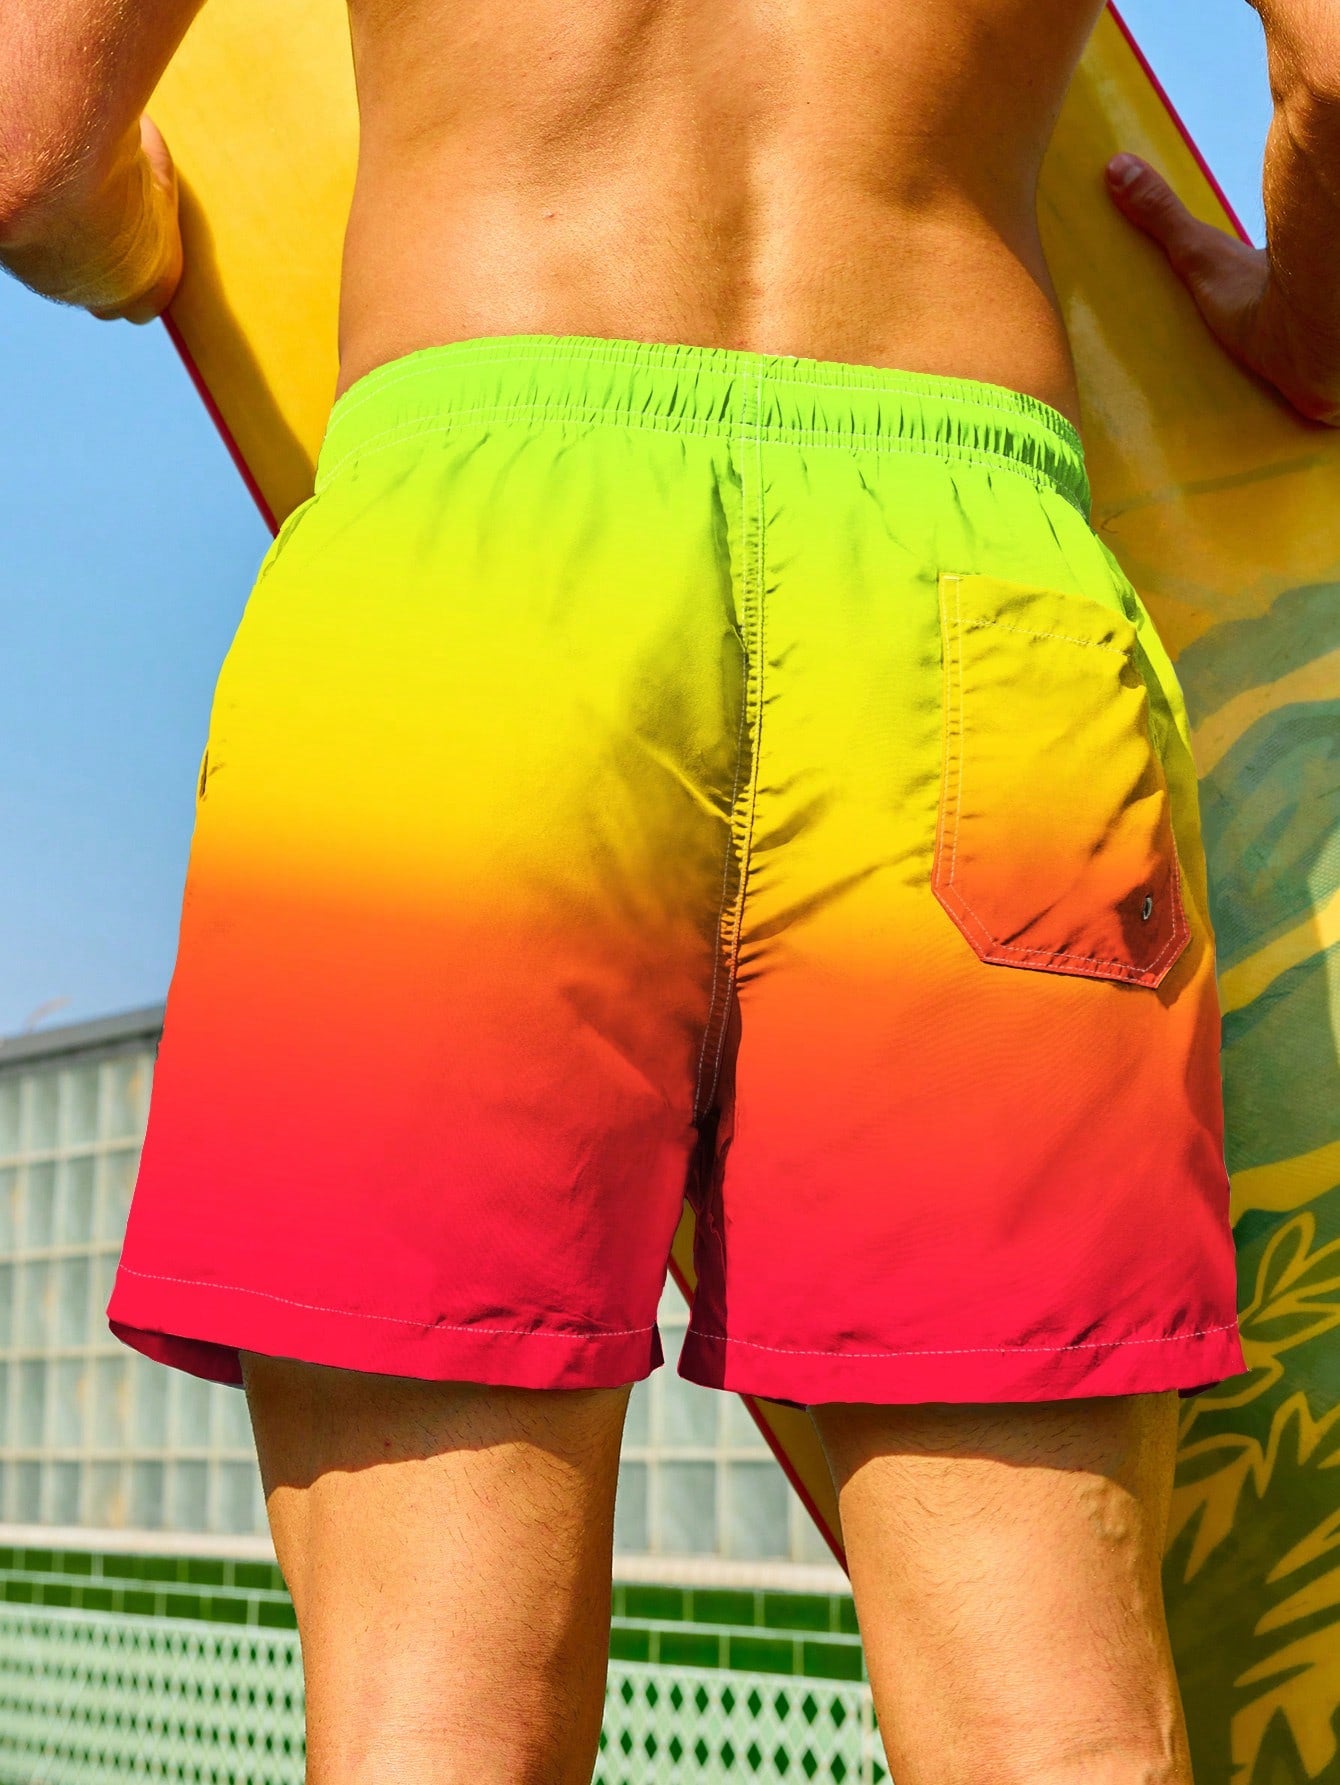 Drawstring Waist Swim Trunks: The Perfect Blend of Style and Comfort